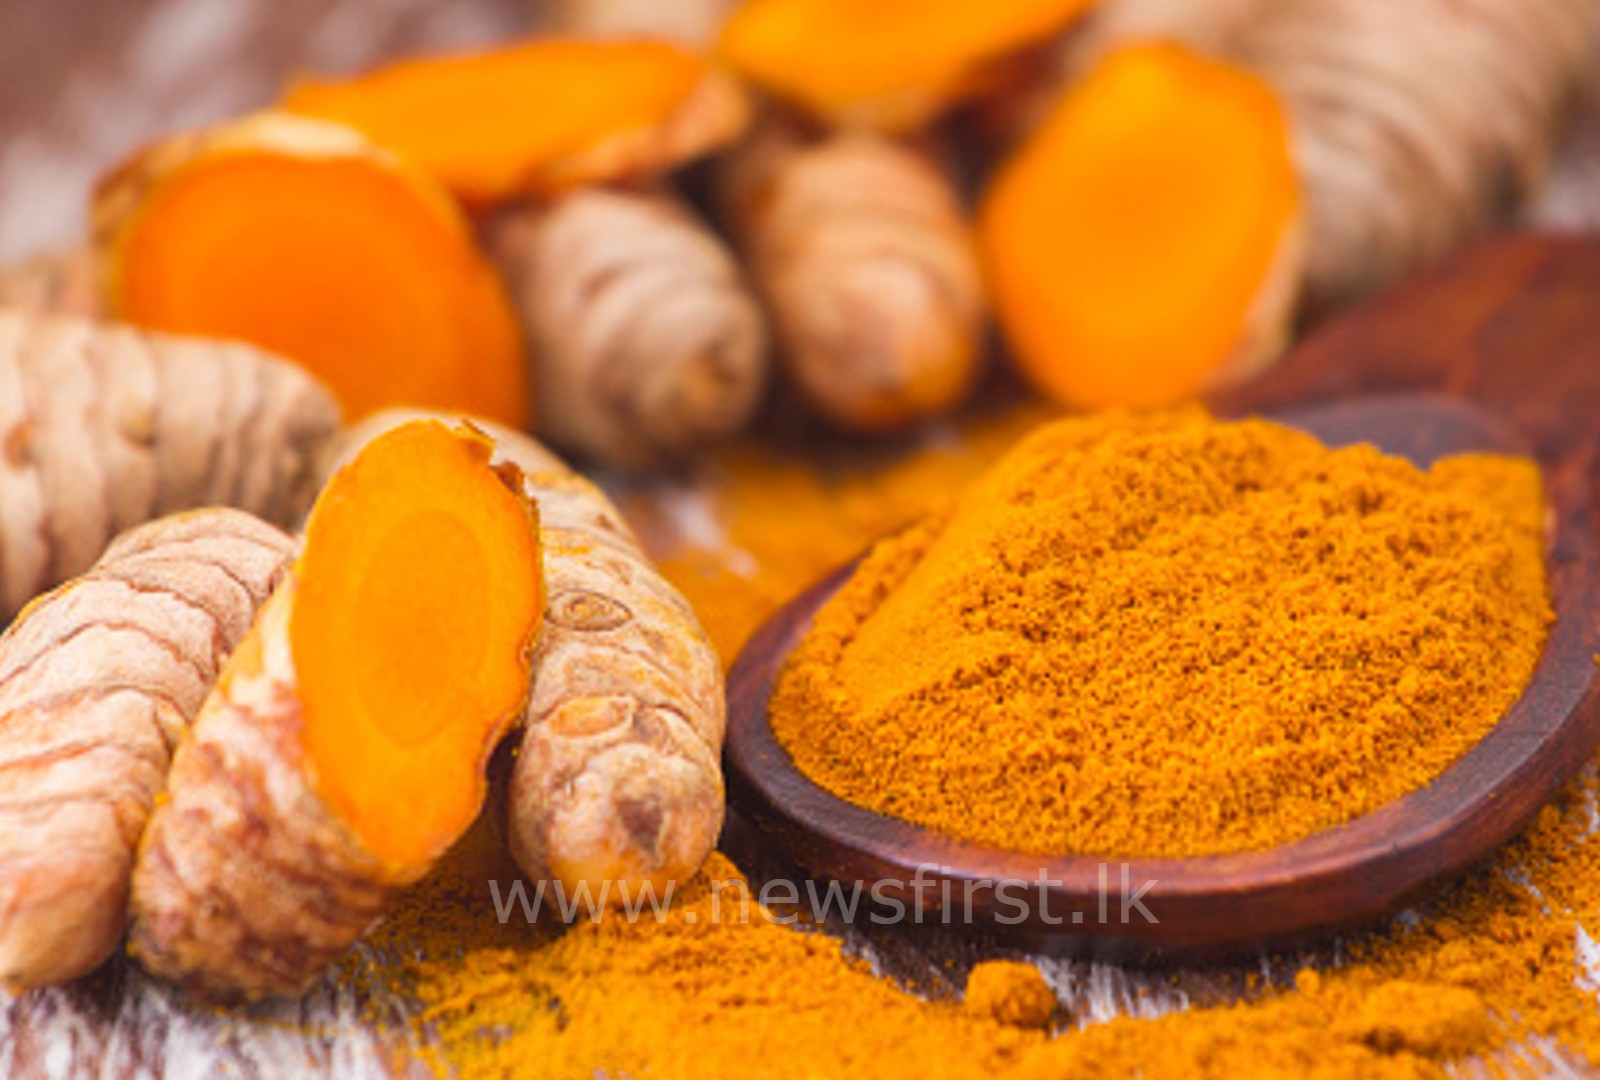 SATHOSA to sell 1 kg of Tumeric for Rs. 2,400/-